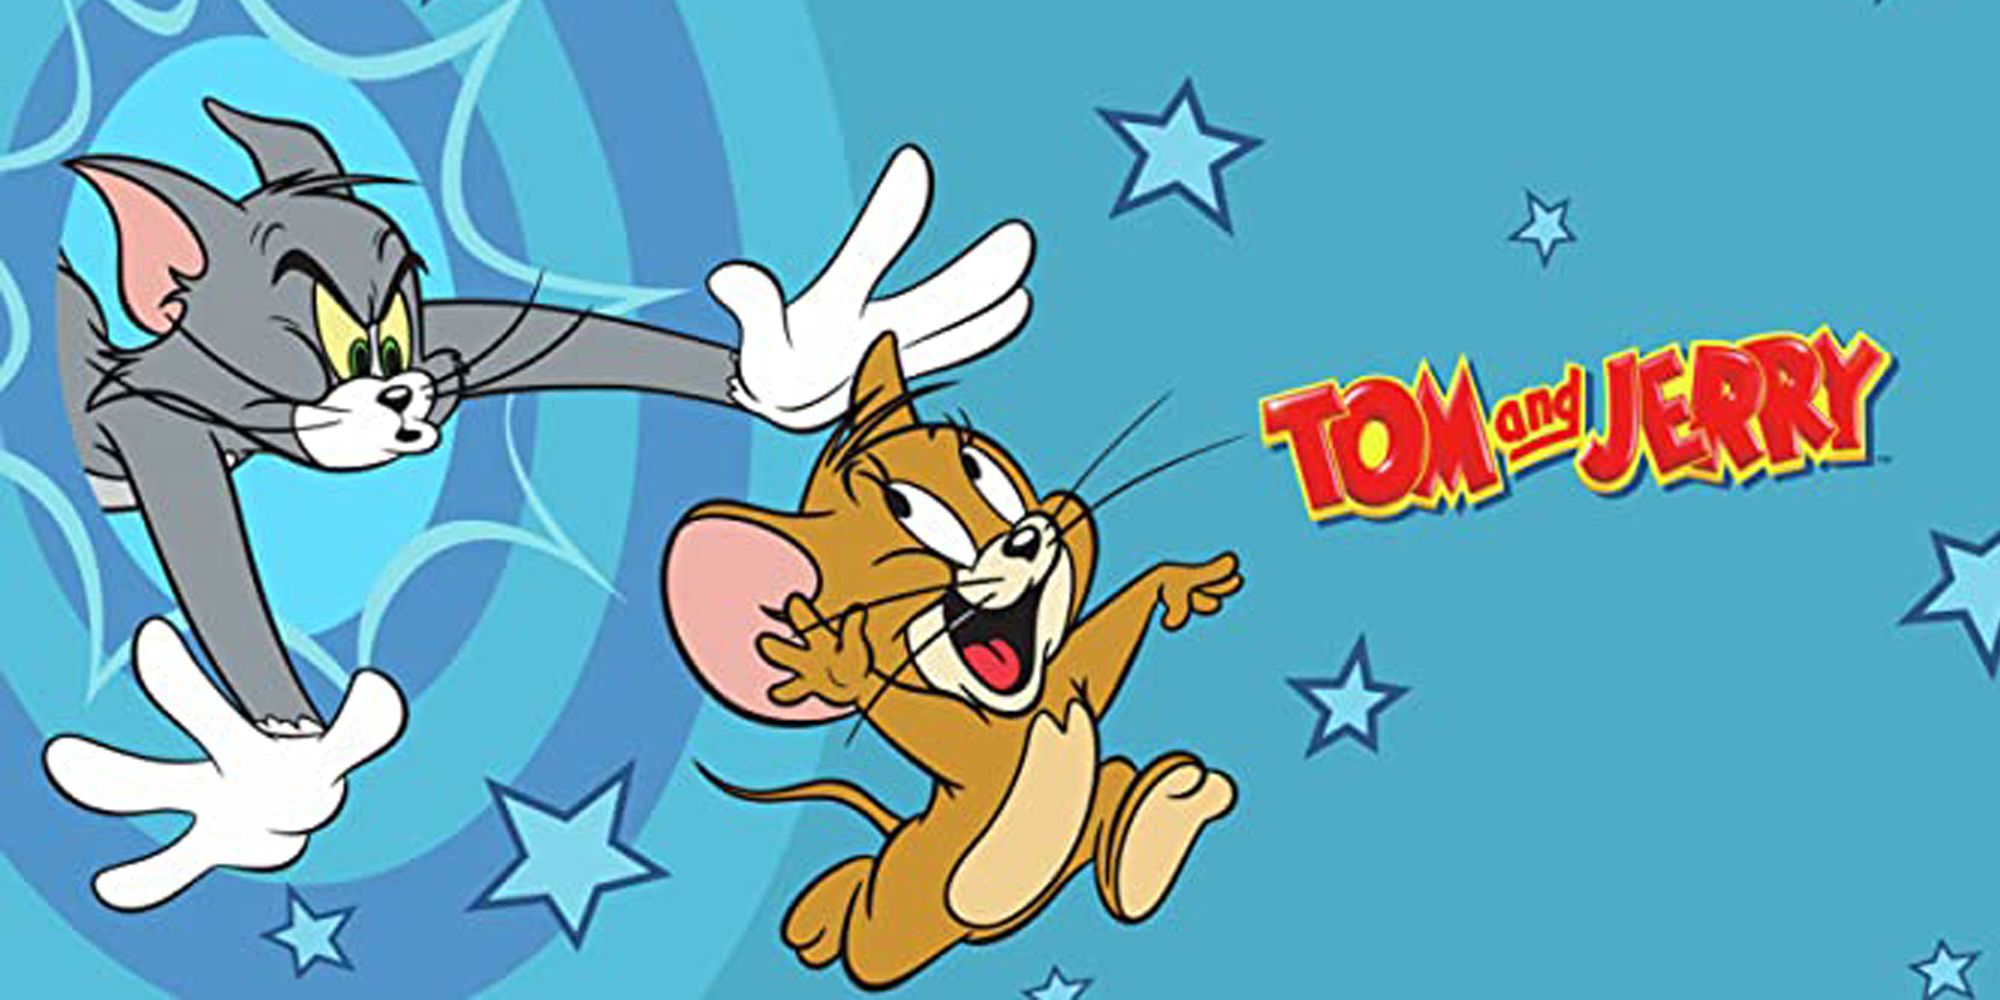 A Tom And Jerry Poster